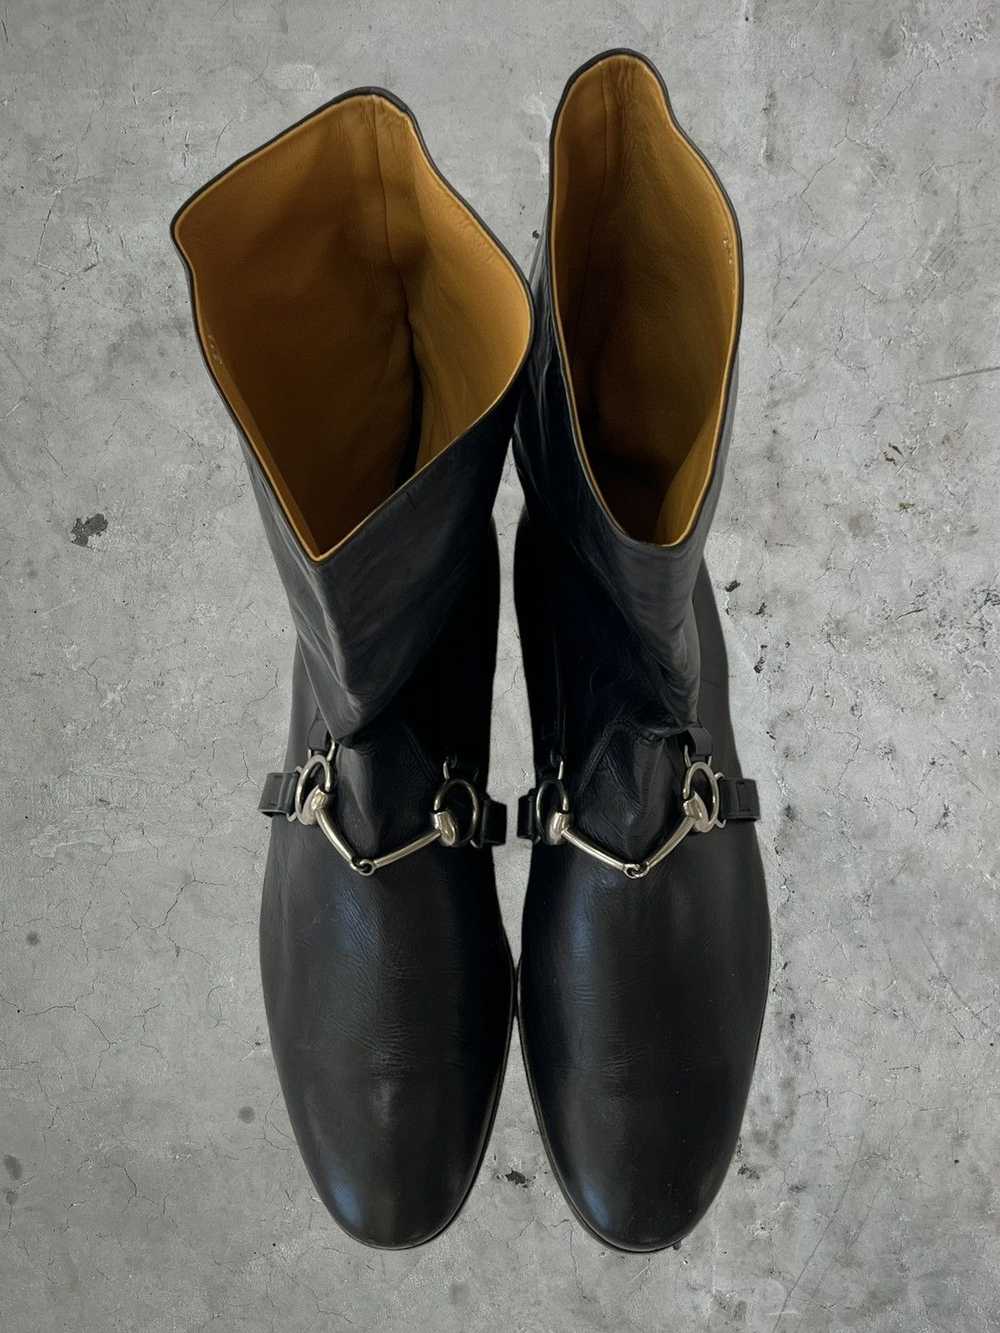 Gucci Gucci Leather Buckle Boots - image 4